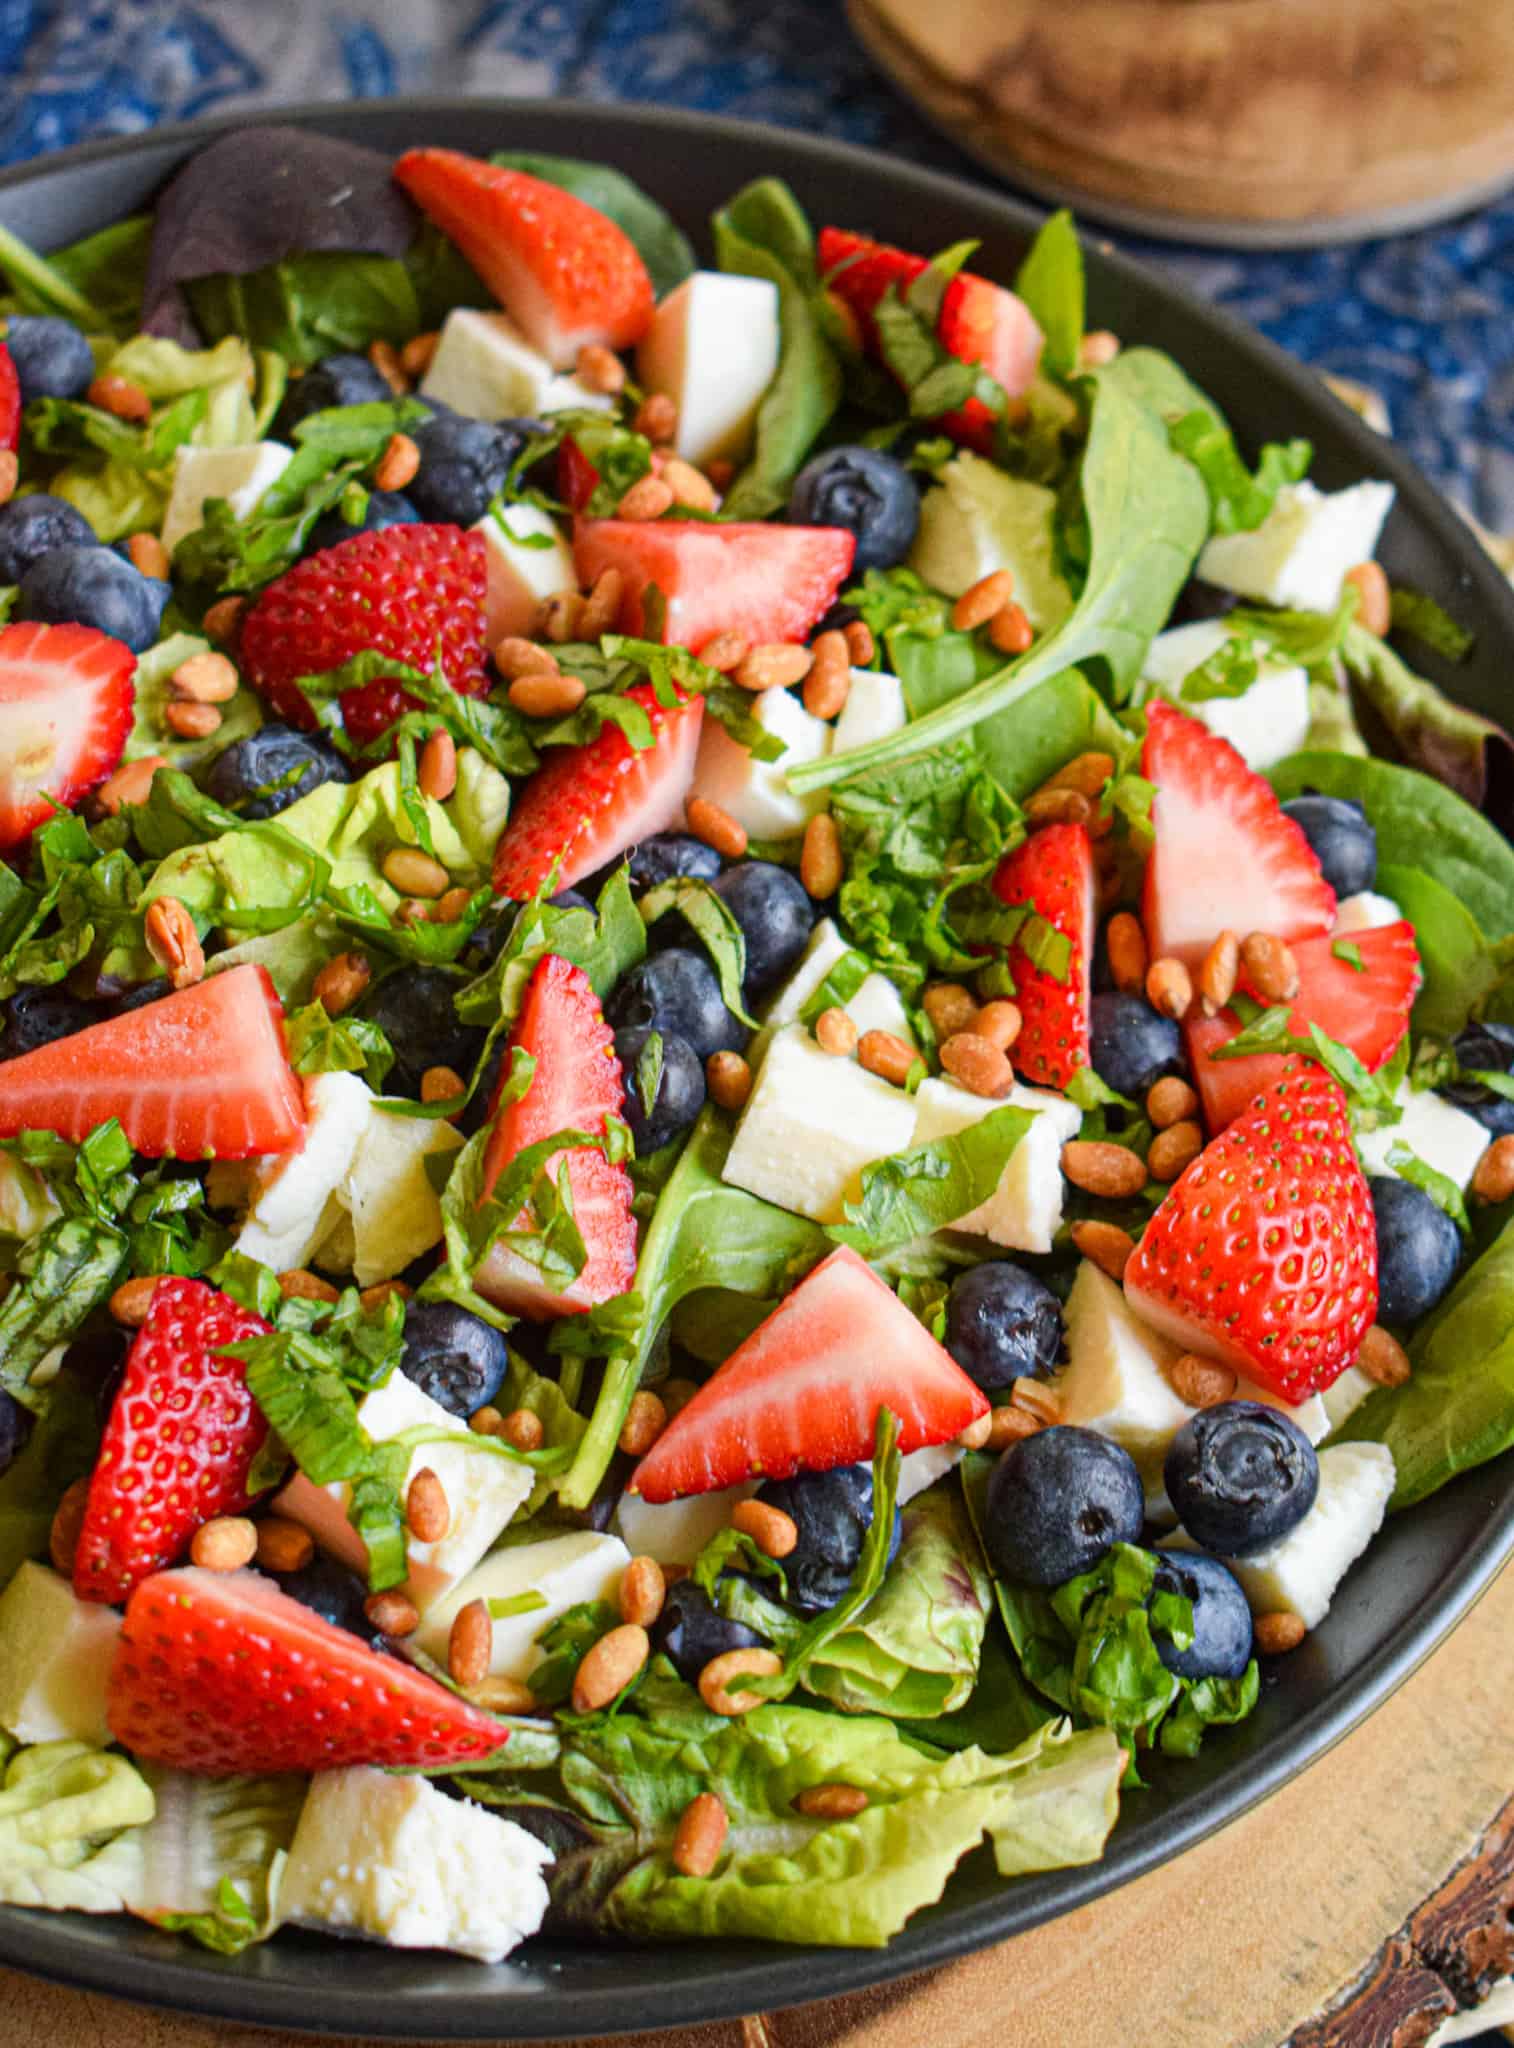 4th of july salad with strawberries, blueberries, mozzarella, pine nuts, basil and balsamic